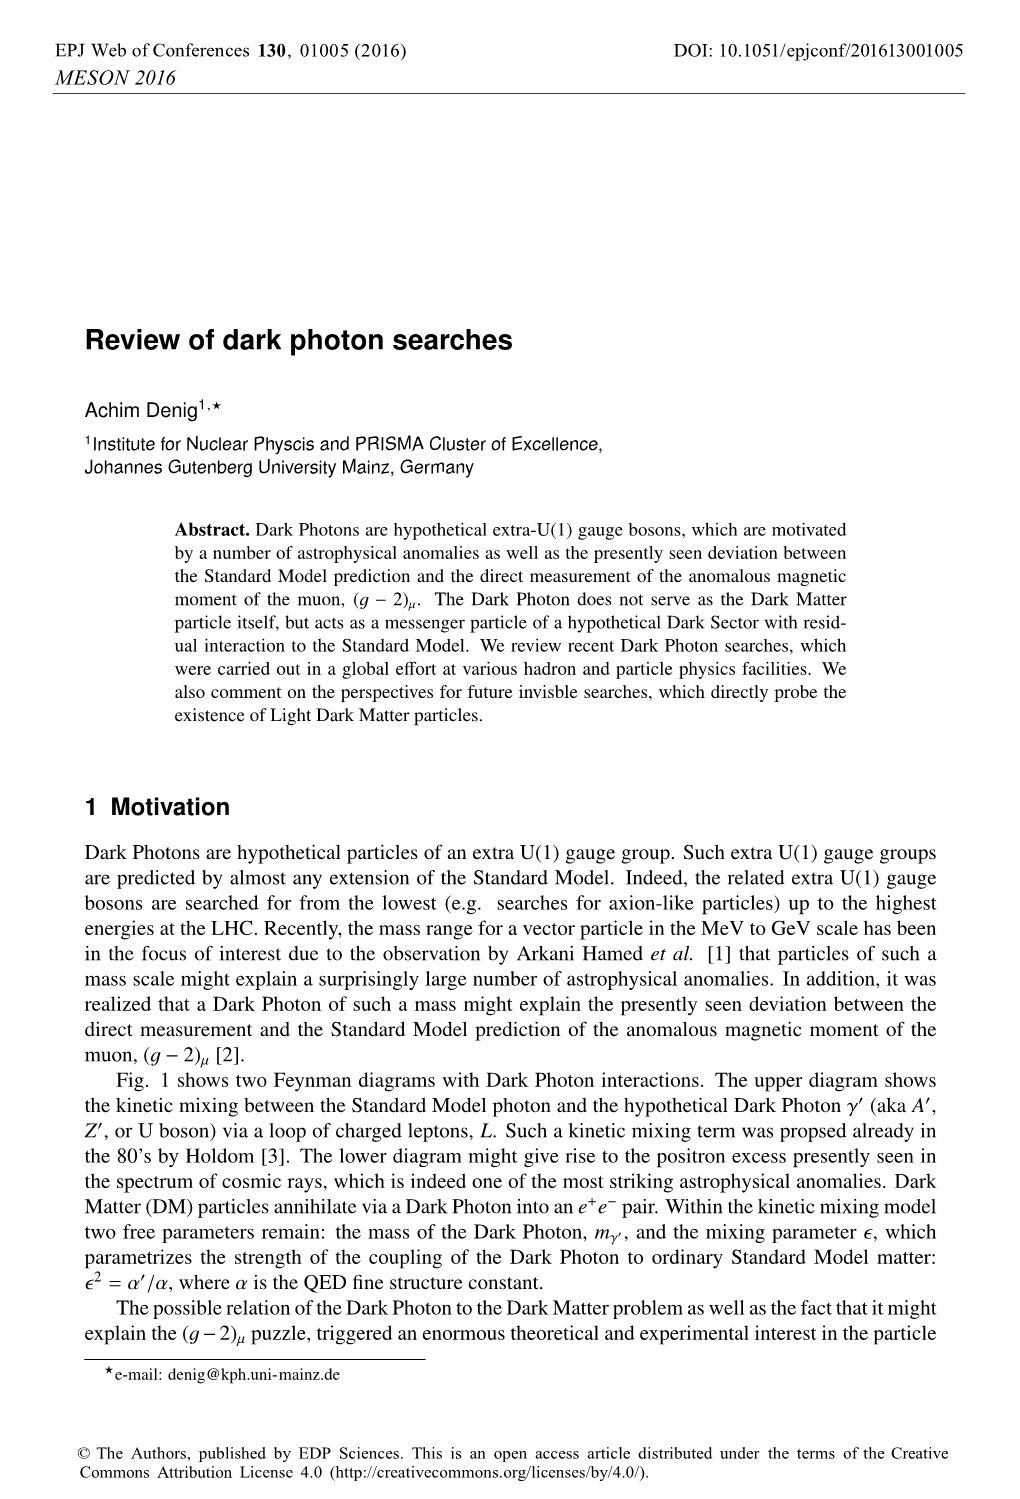 Review of Dark Photon Searches